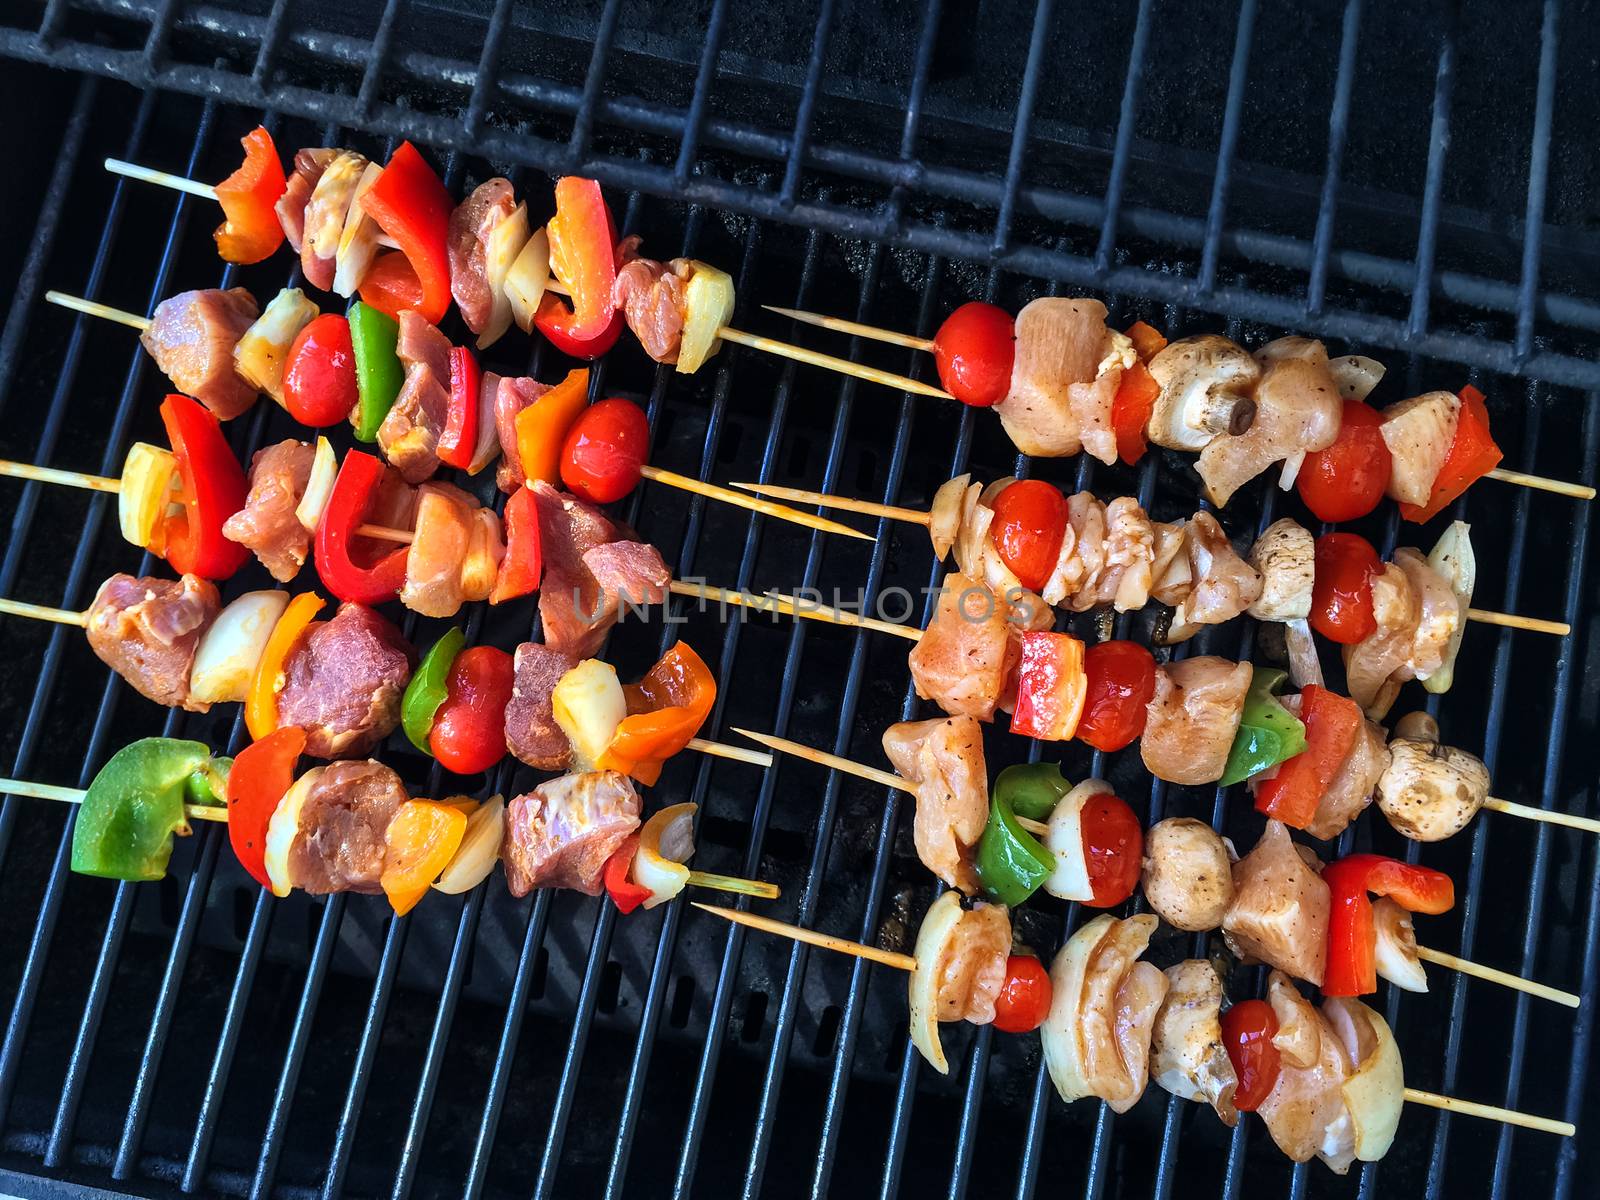 Meat and vegetable skewers on a grill by anikasalsera